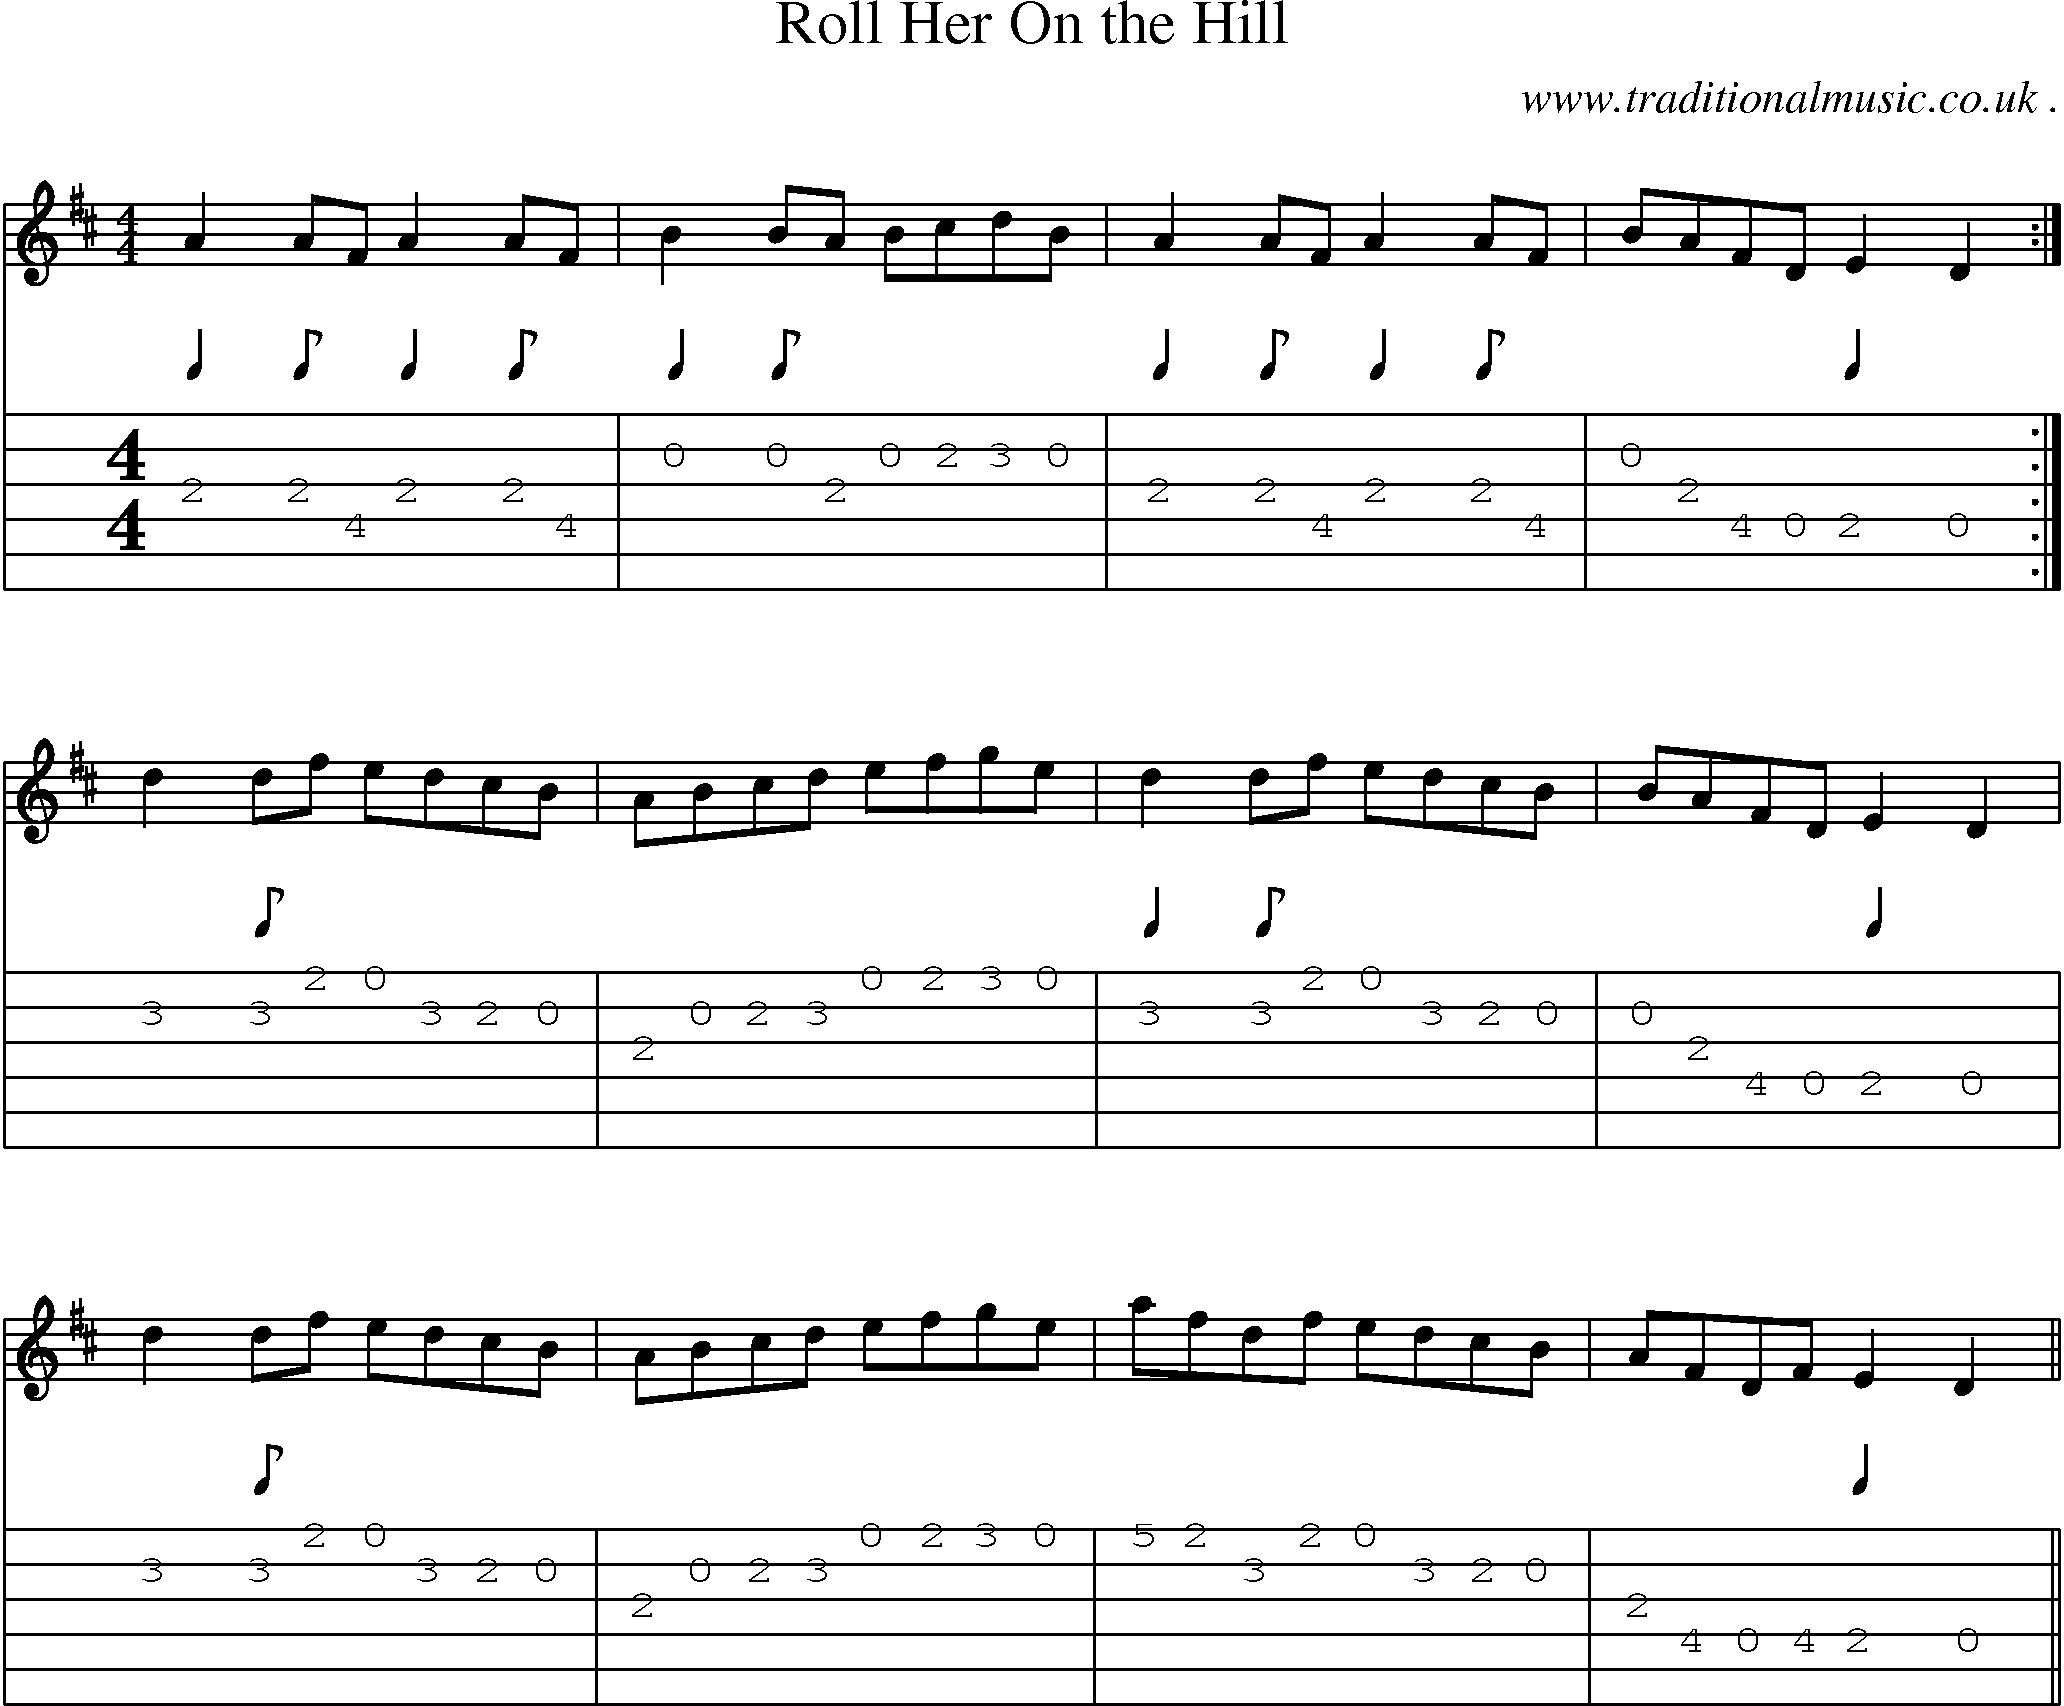 Sheet-music  score, Chords and Guitar Tabs for Roll Her On The Hill